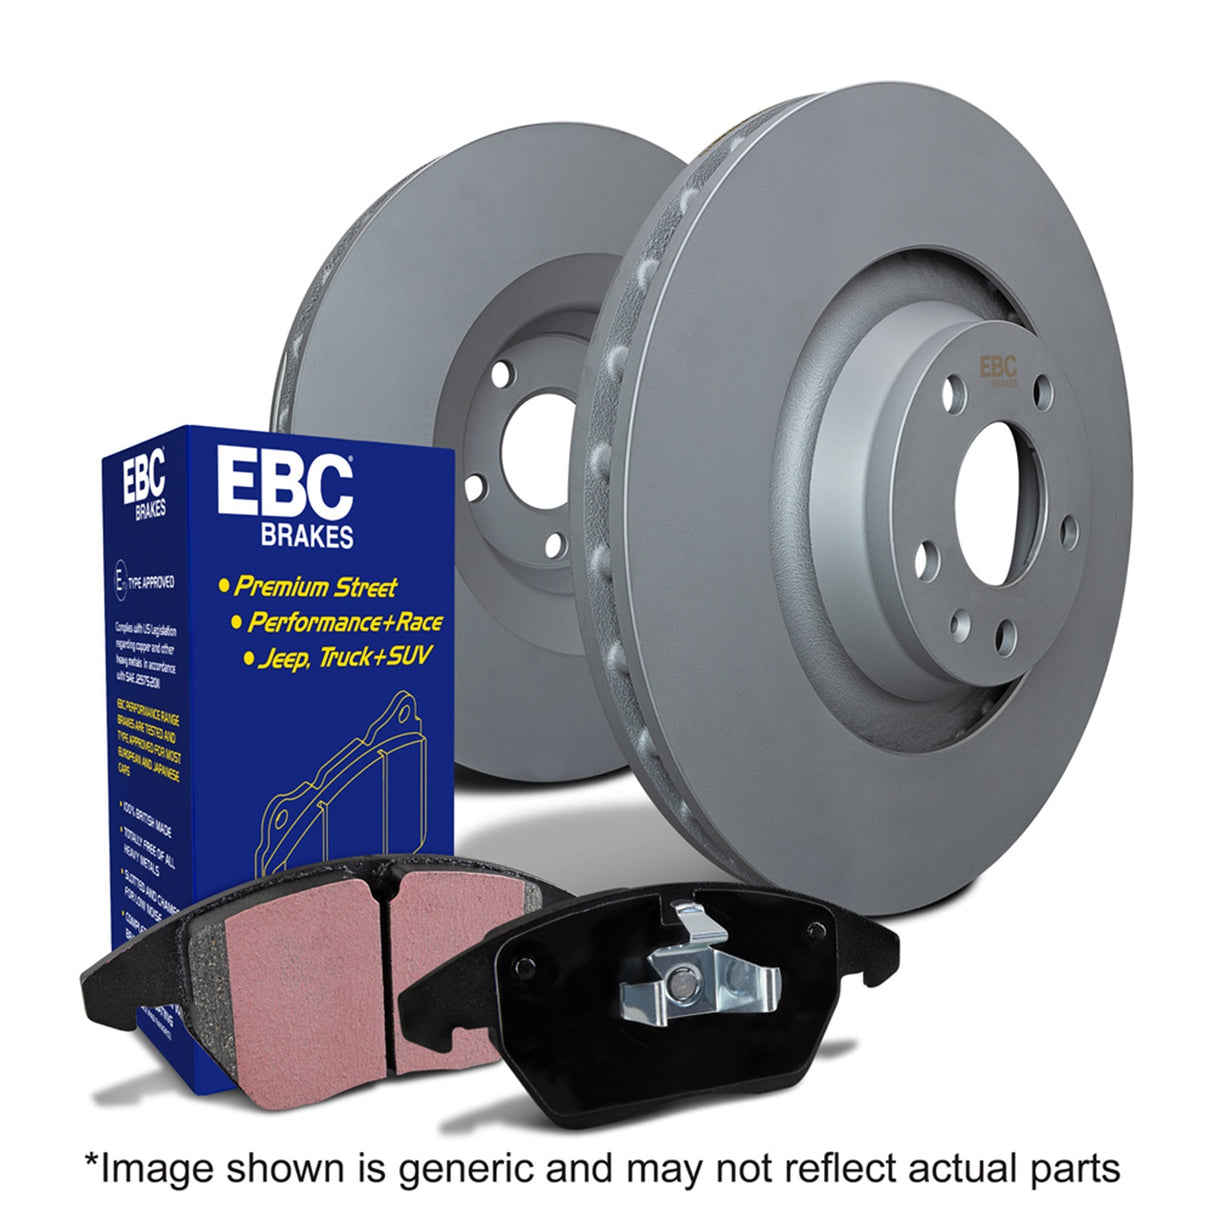 EBC Brakes S20K1330 S20 Kits Ultimax and Plain Rotors - Roam Overland Outfitters